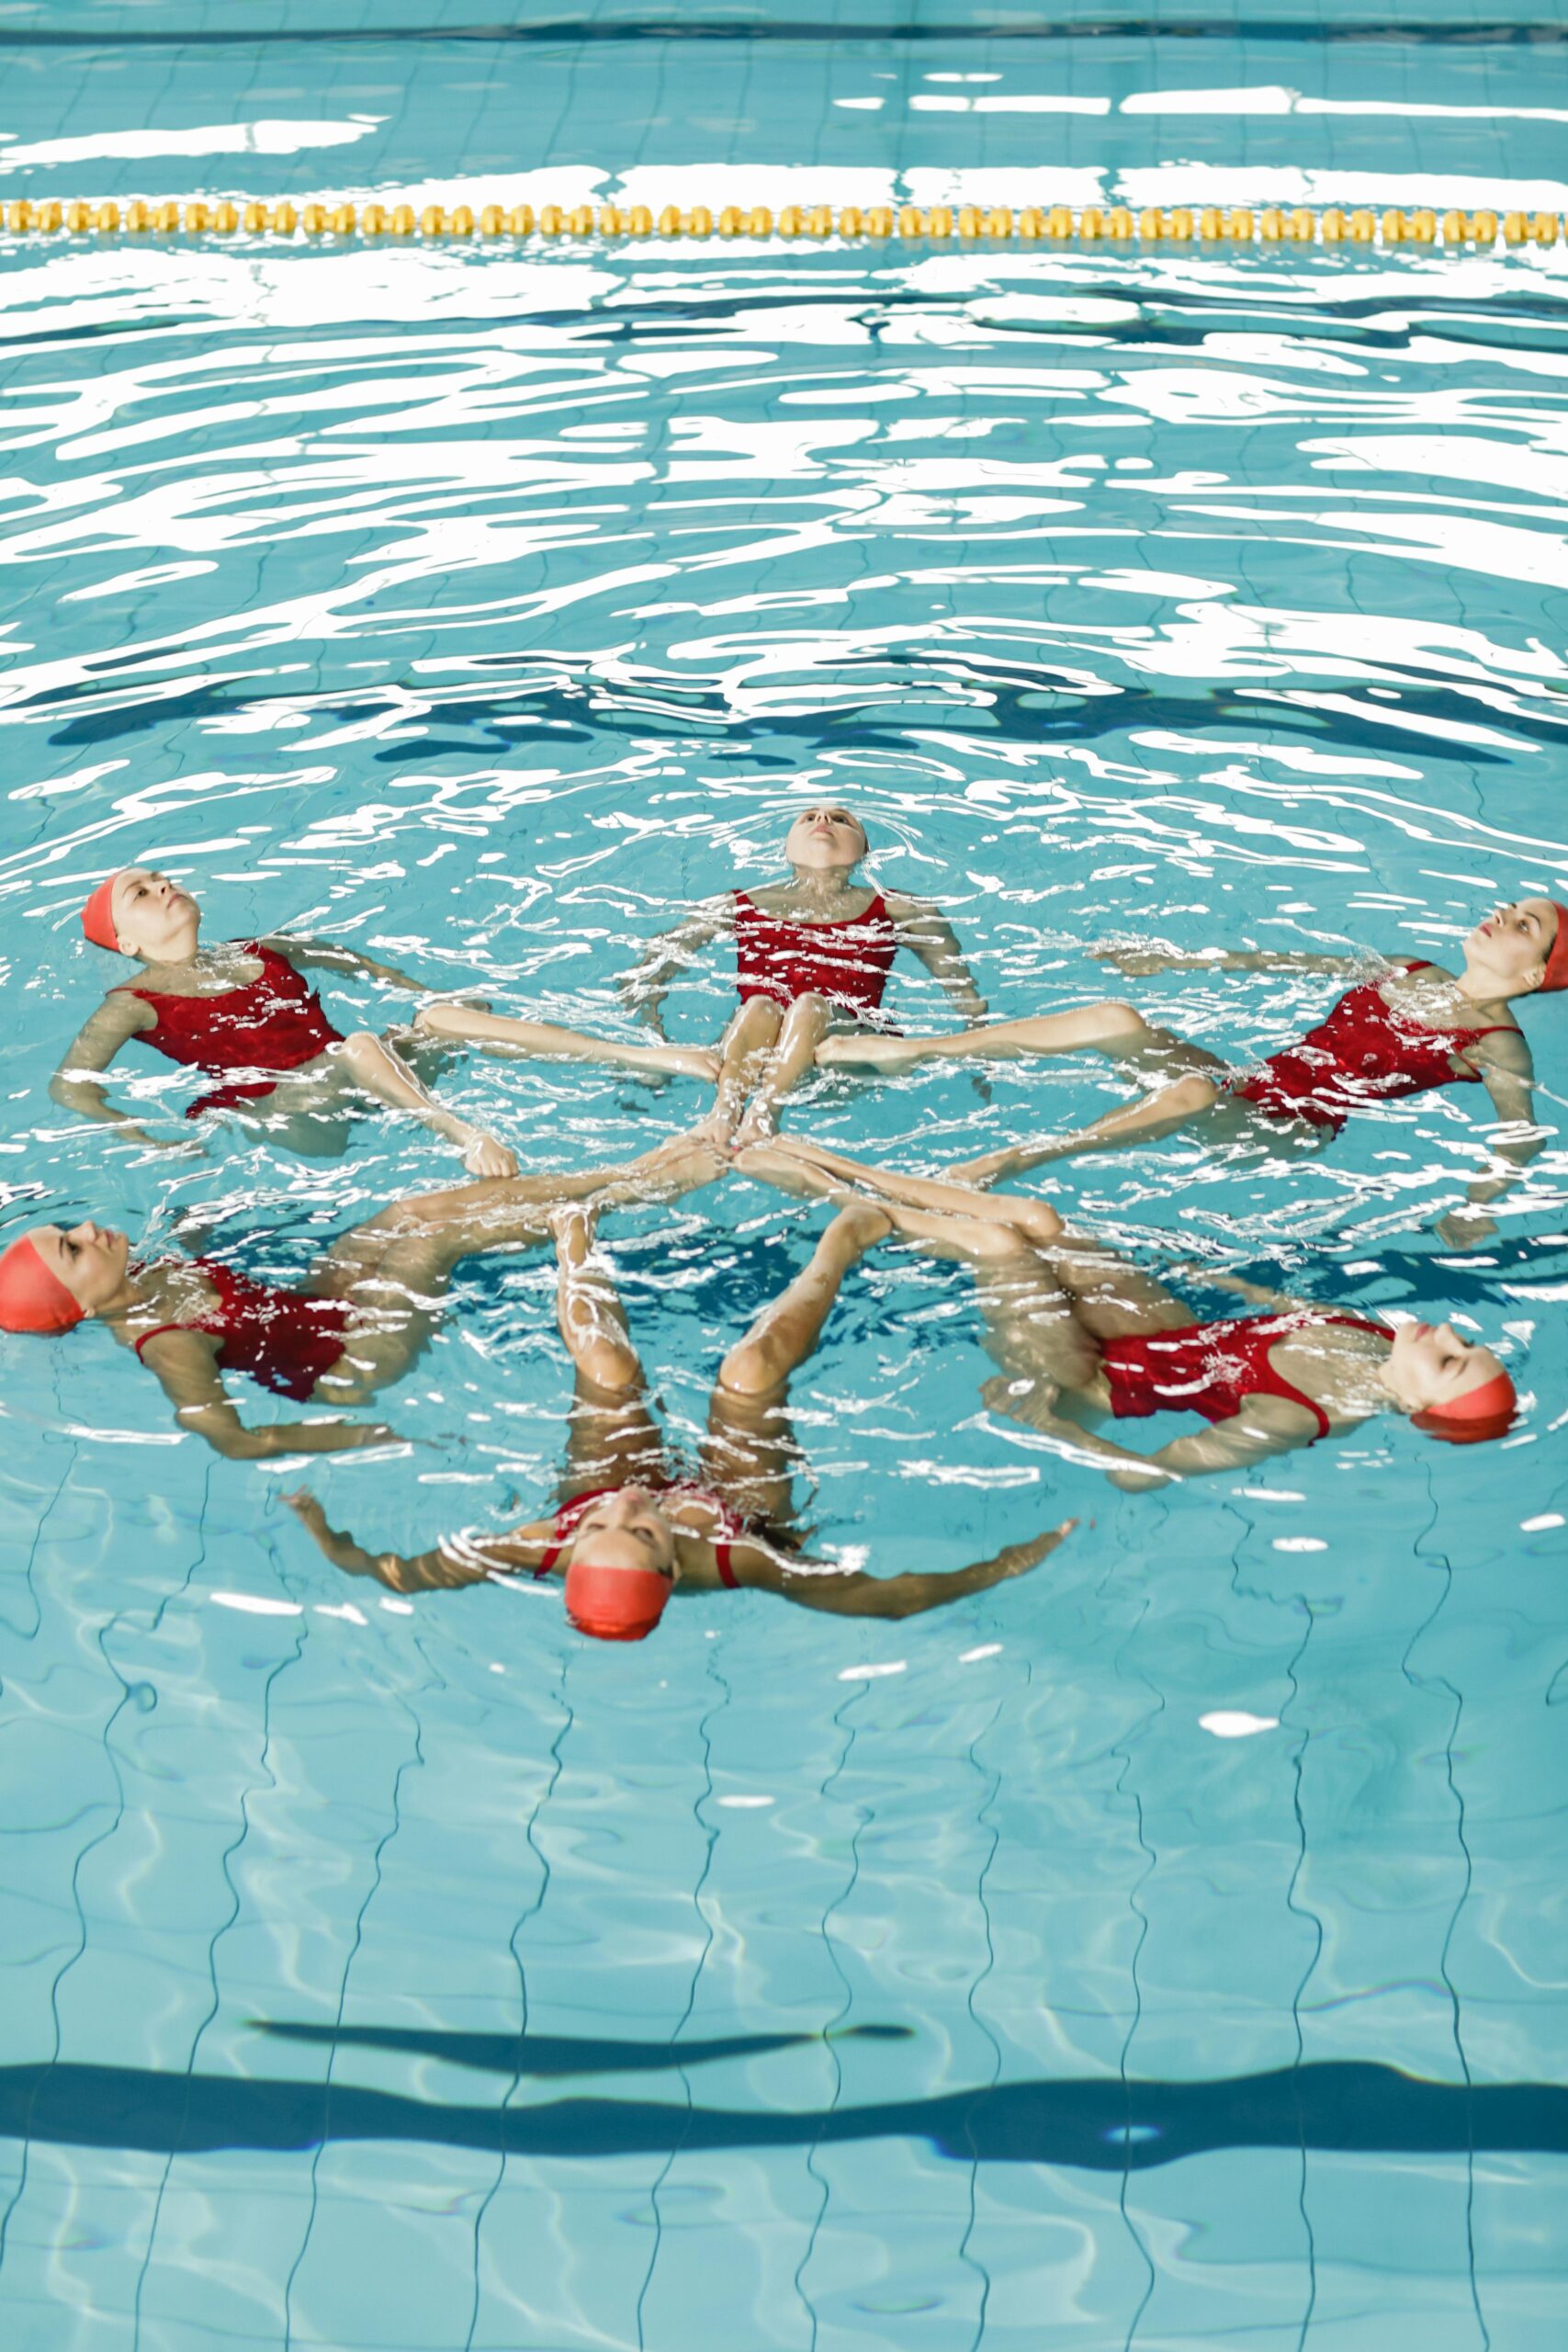 Ladies in a pool performing synchronized swimming, inspiring marketing lessons.